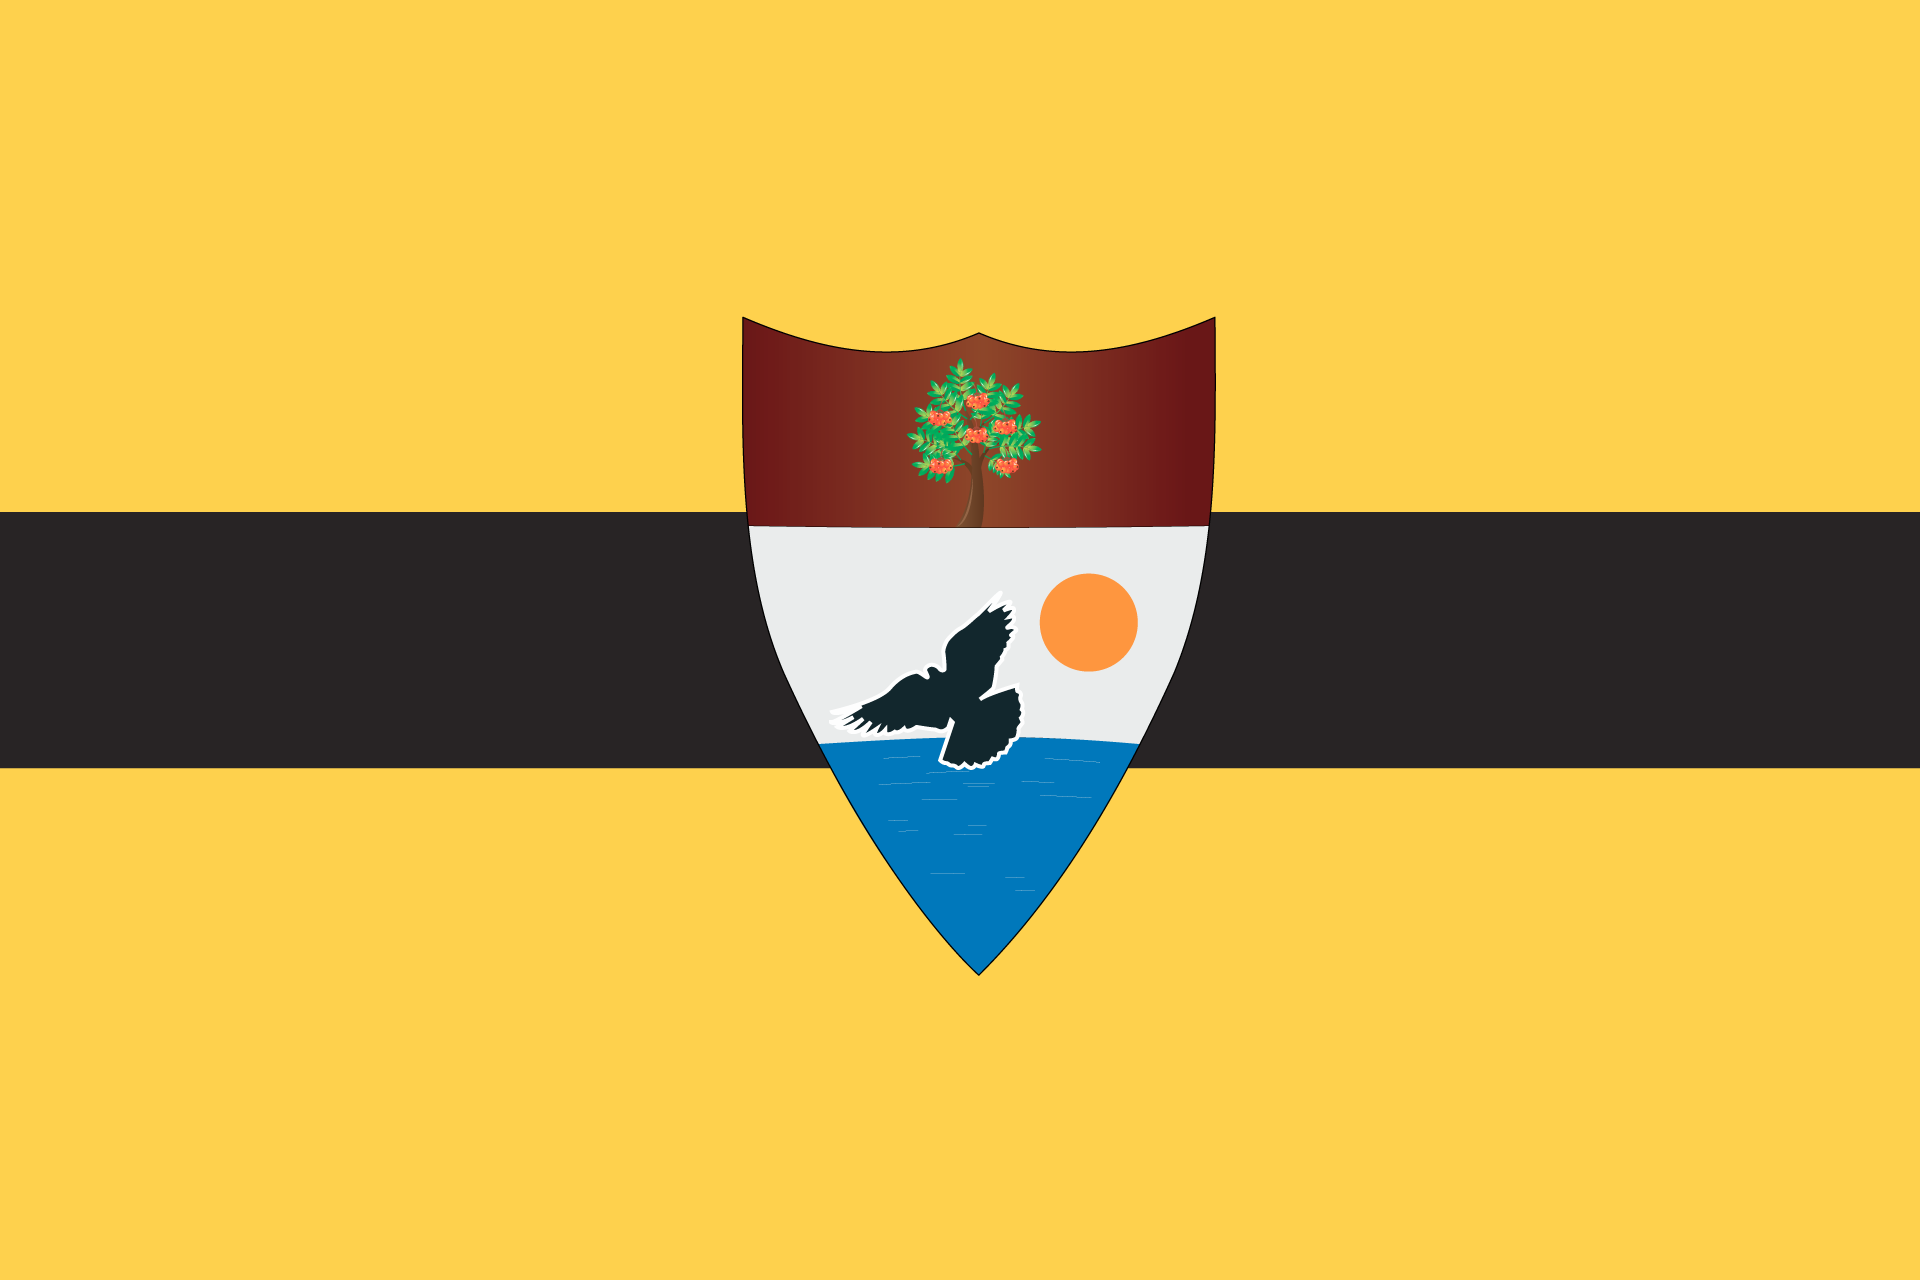 The "official" flag of the Republic of Liberland. Design by Vít Jedlička, used under Creative Commons license. 